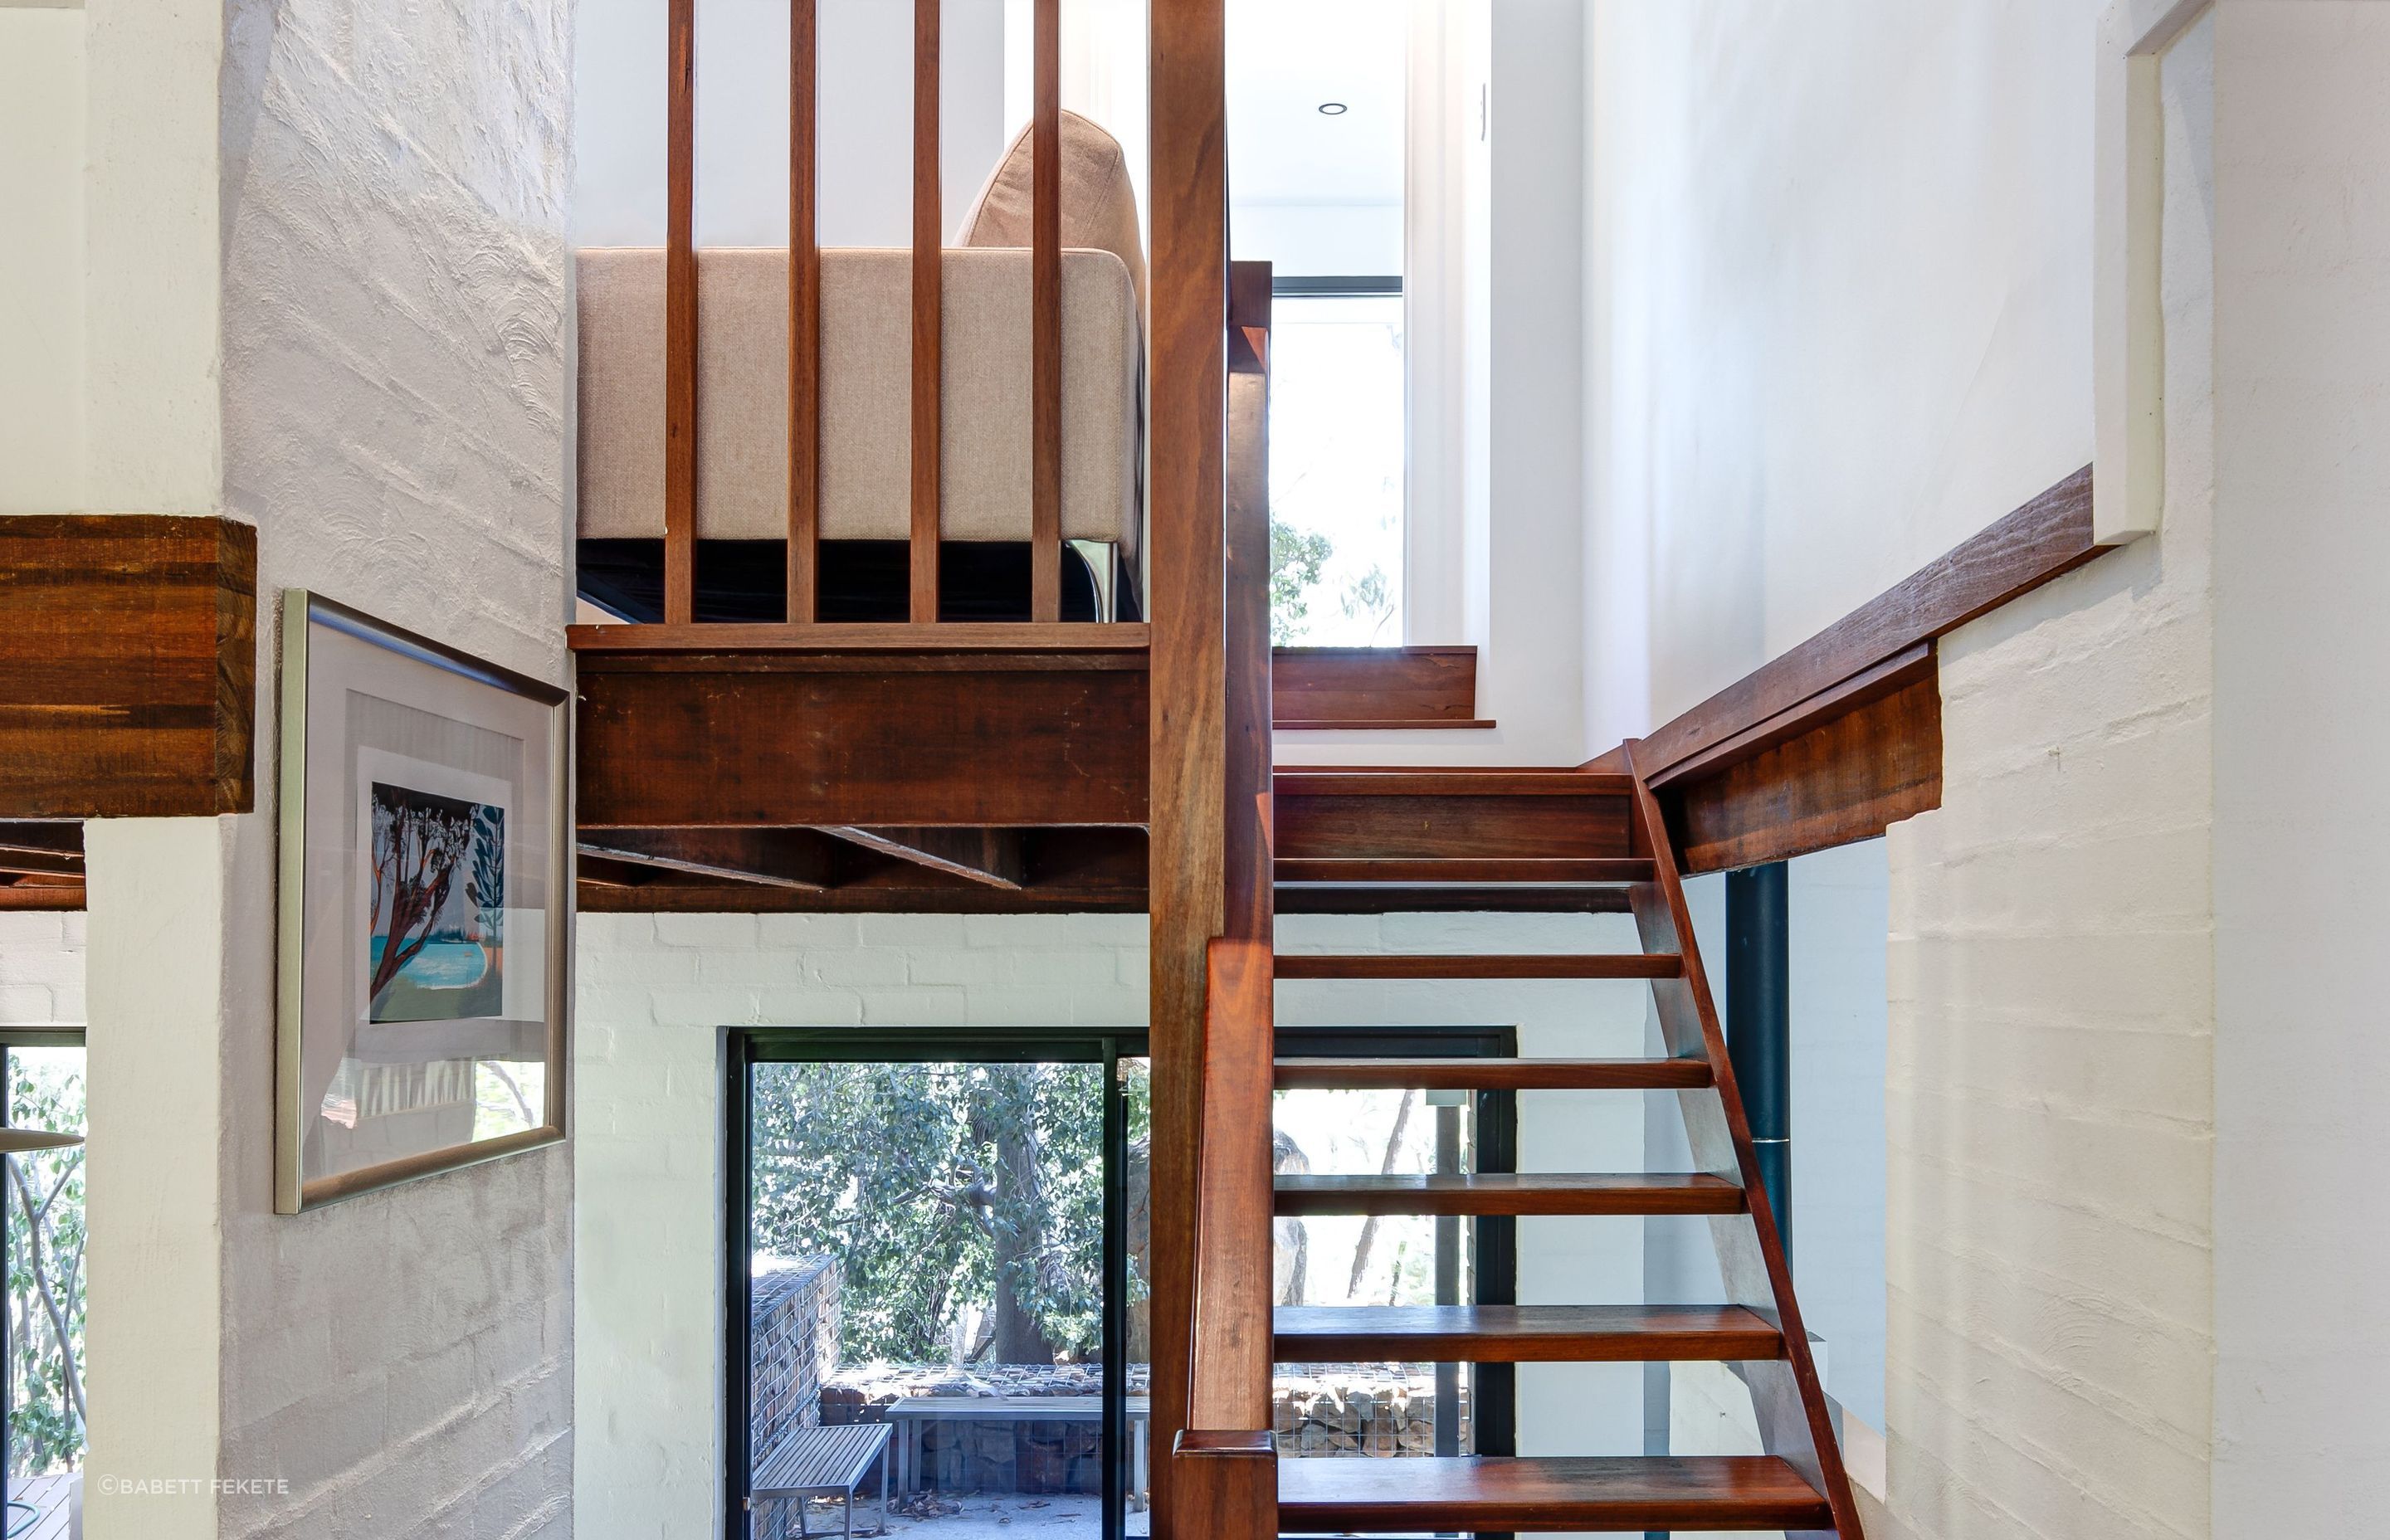 A seamless connection is created between the space and the existing upper floor through the original jarrah staircase.